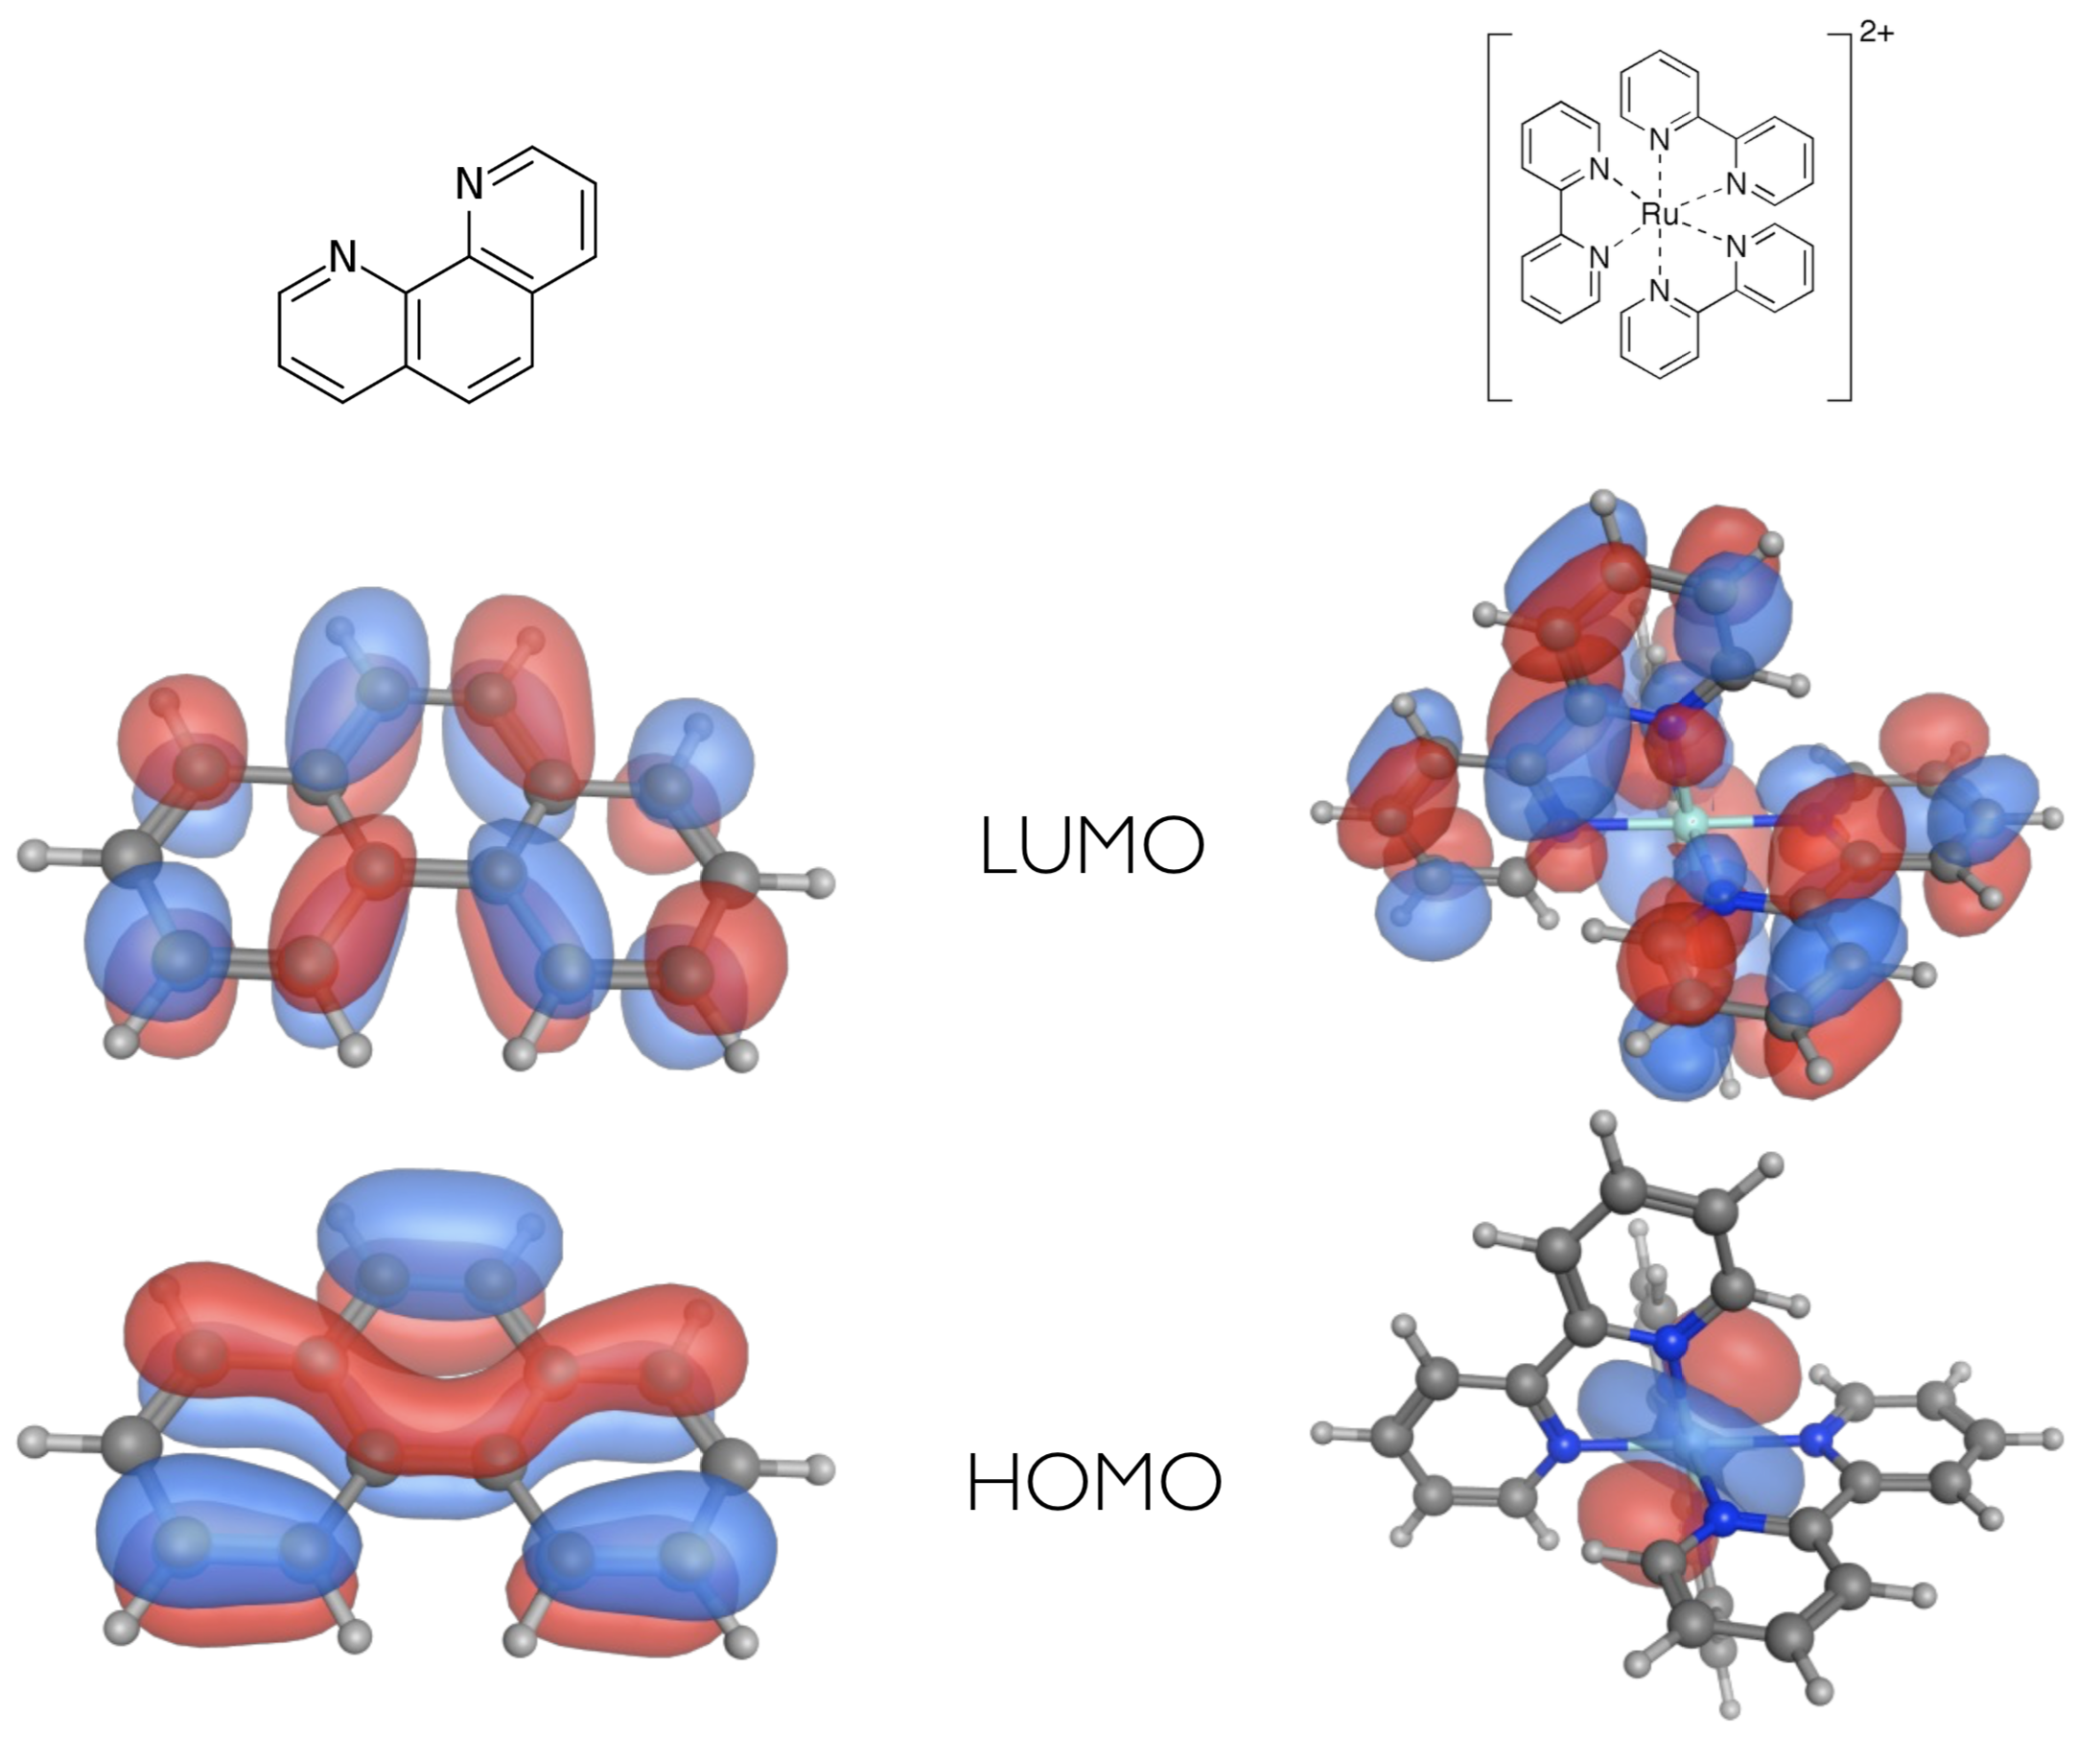 The calculated HOMO (bottom) and LUMO (top) of 1,10-phenanthroline (left) a model planar organic chromophore and [Ru (bpy)$_3$]$^{2+}$ (bpy - bipyridine) which has an MLCT state. For the ruthenium complex the HOMO is clearly centred on $4d_{z^2}$ orbital, whereas after absorption of a photon (and transfer of the electron) the electron density is then centred over the ligands in the LUMO.